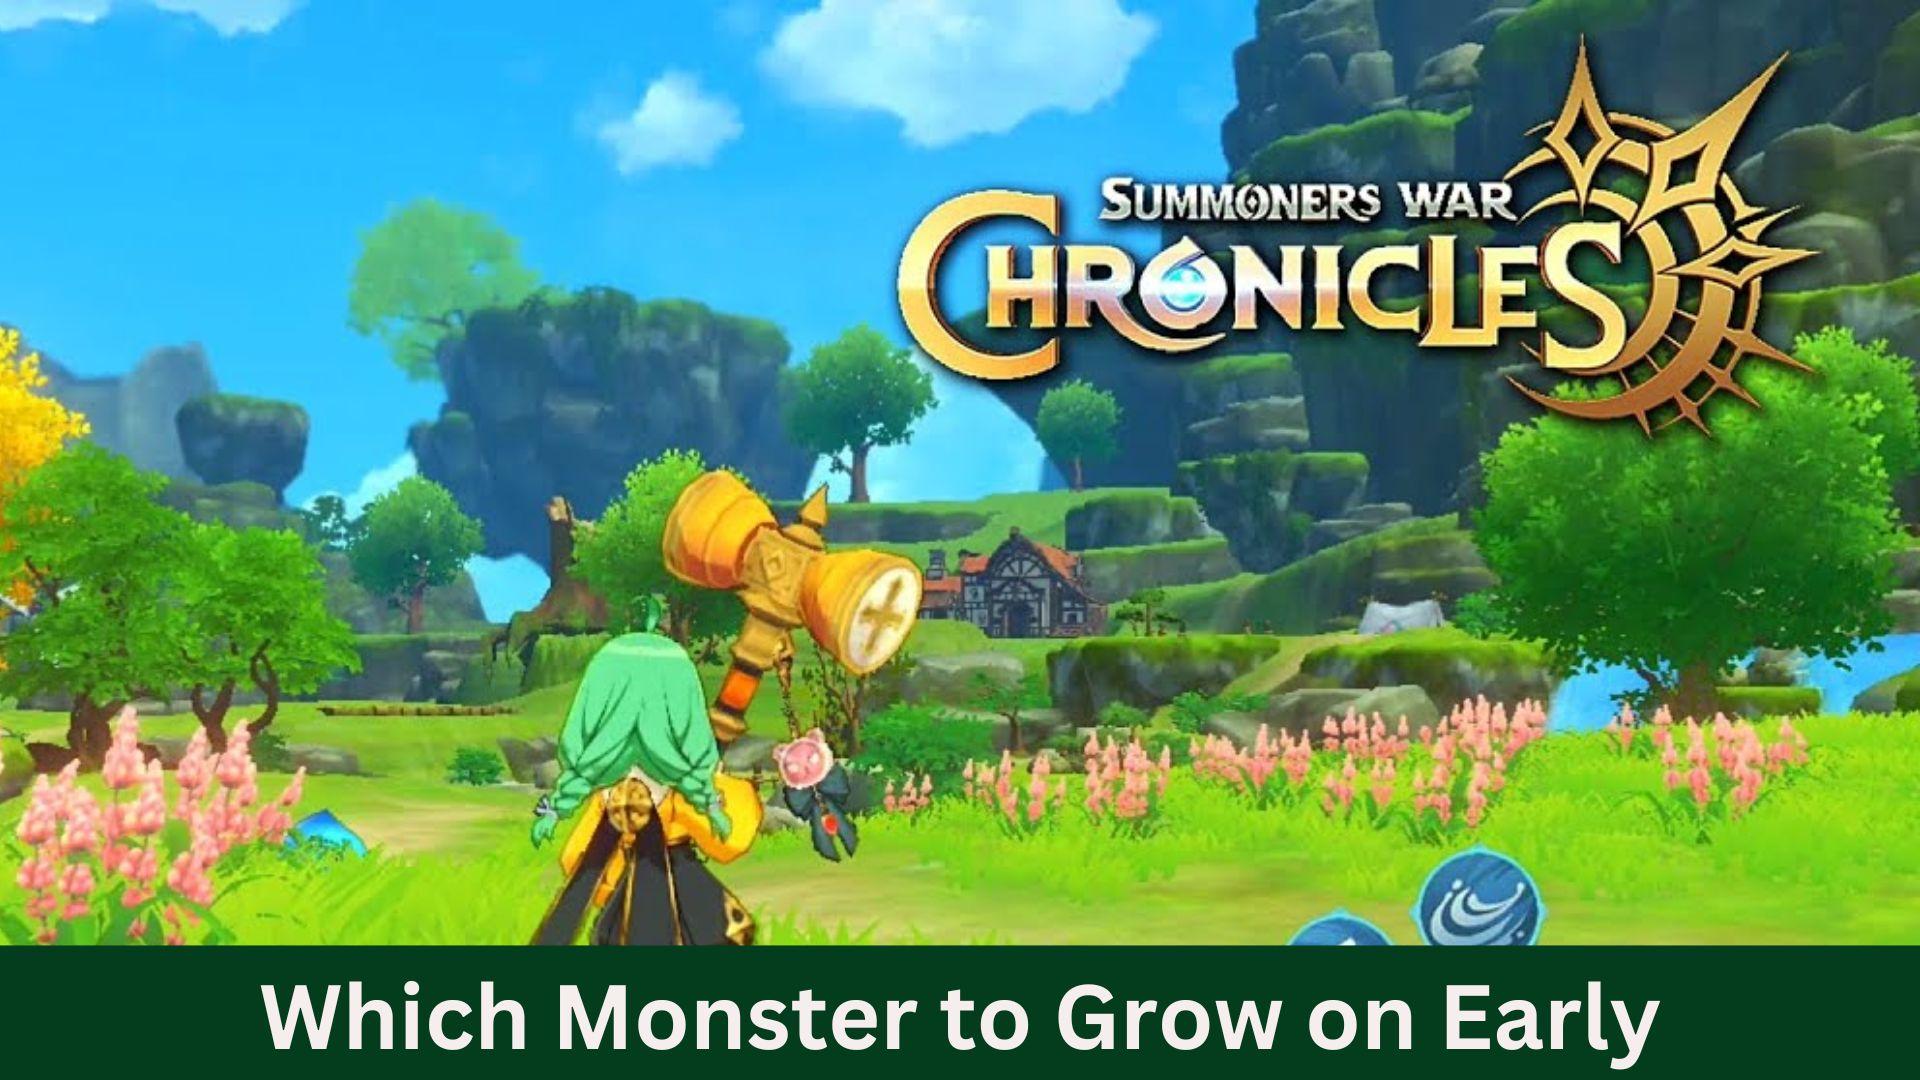 All Summoners War: Chronicles Coupon Codes and how to use them